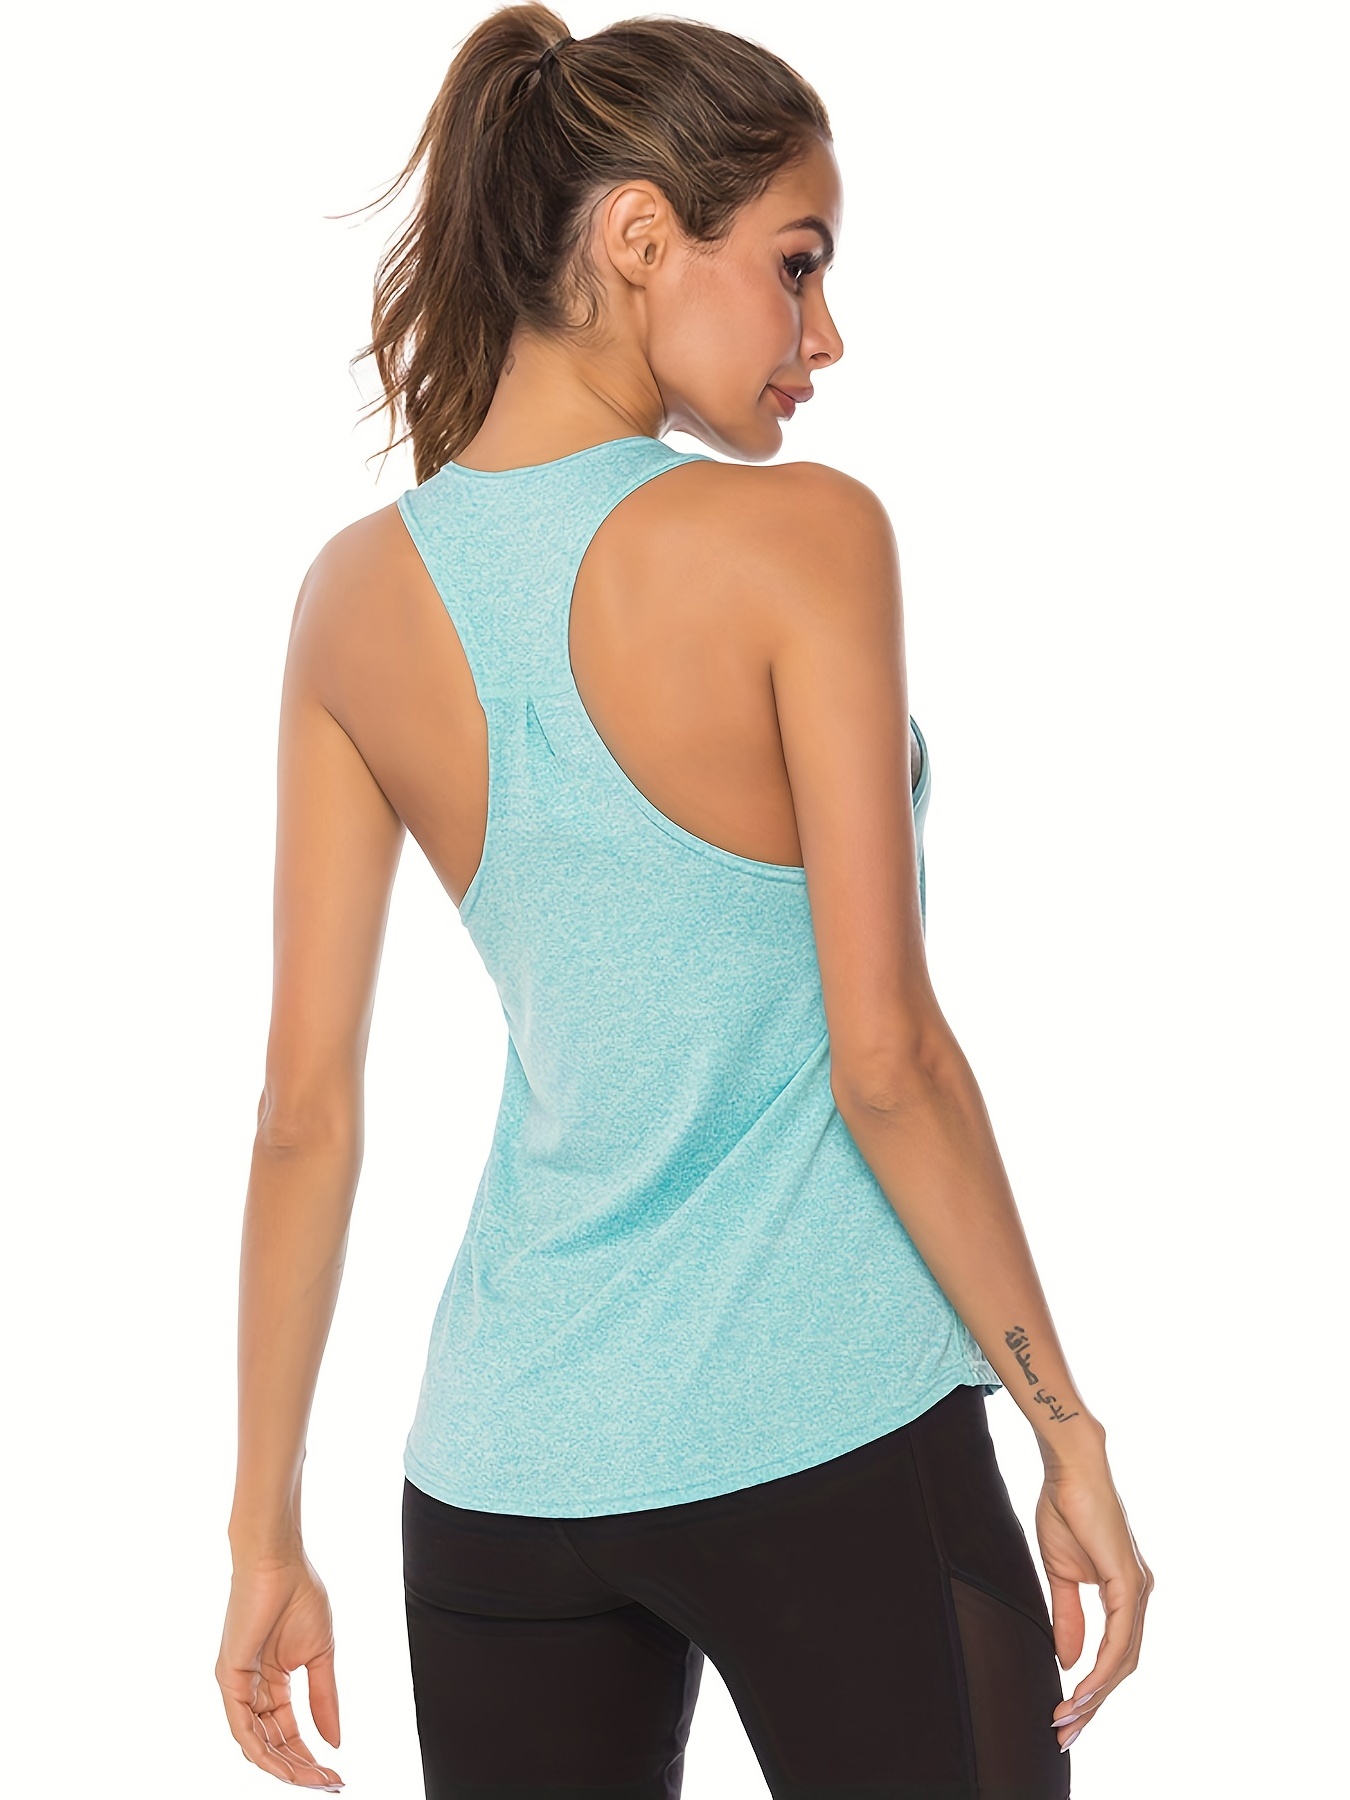 Wholesale Ukaste Women's Studio Essential Racerback Tank Top Yoga  Performance Workout Tops : Clothing, Shoes & Jewelry